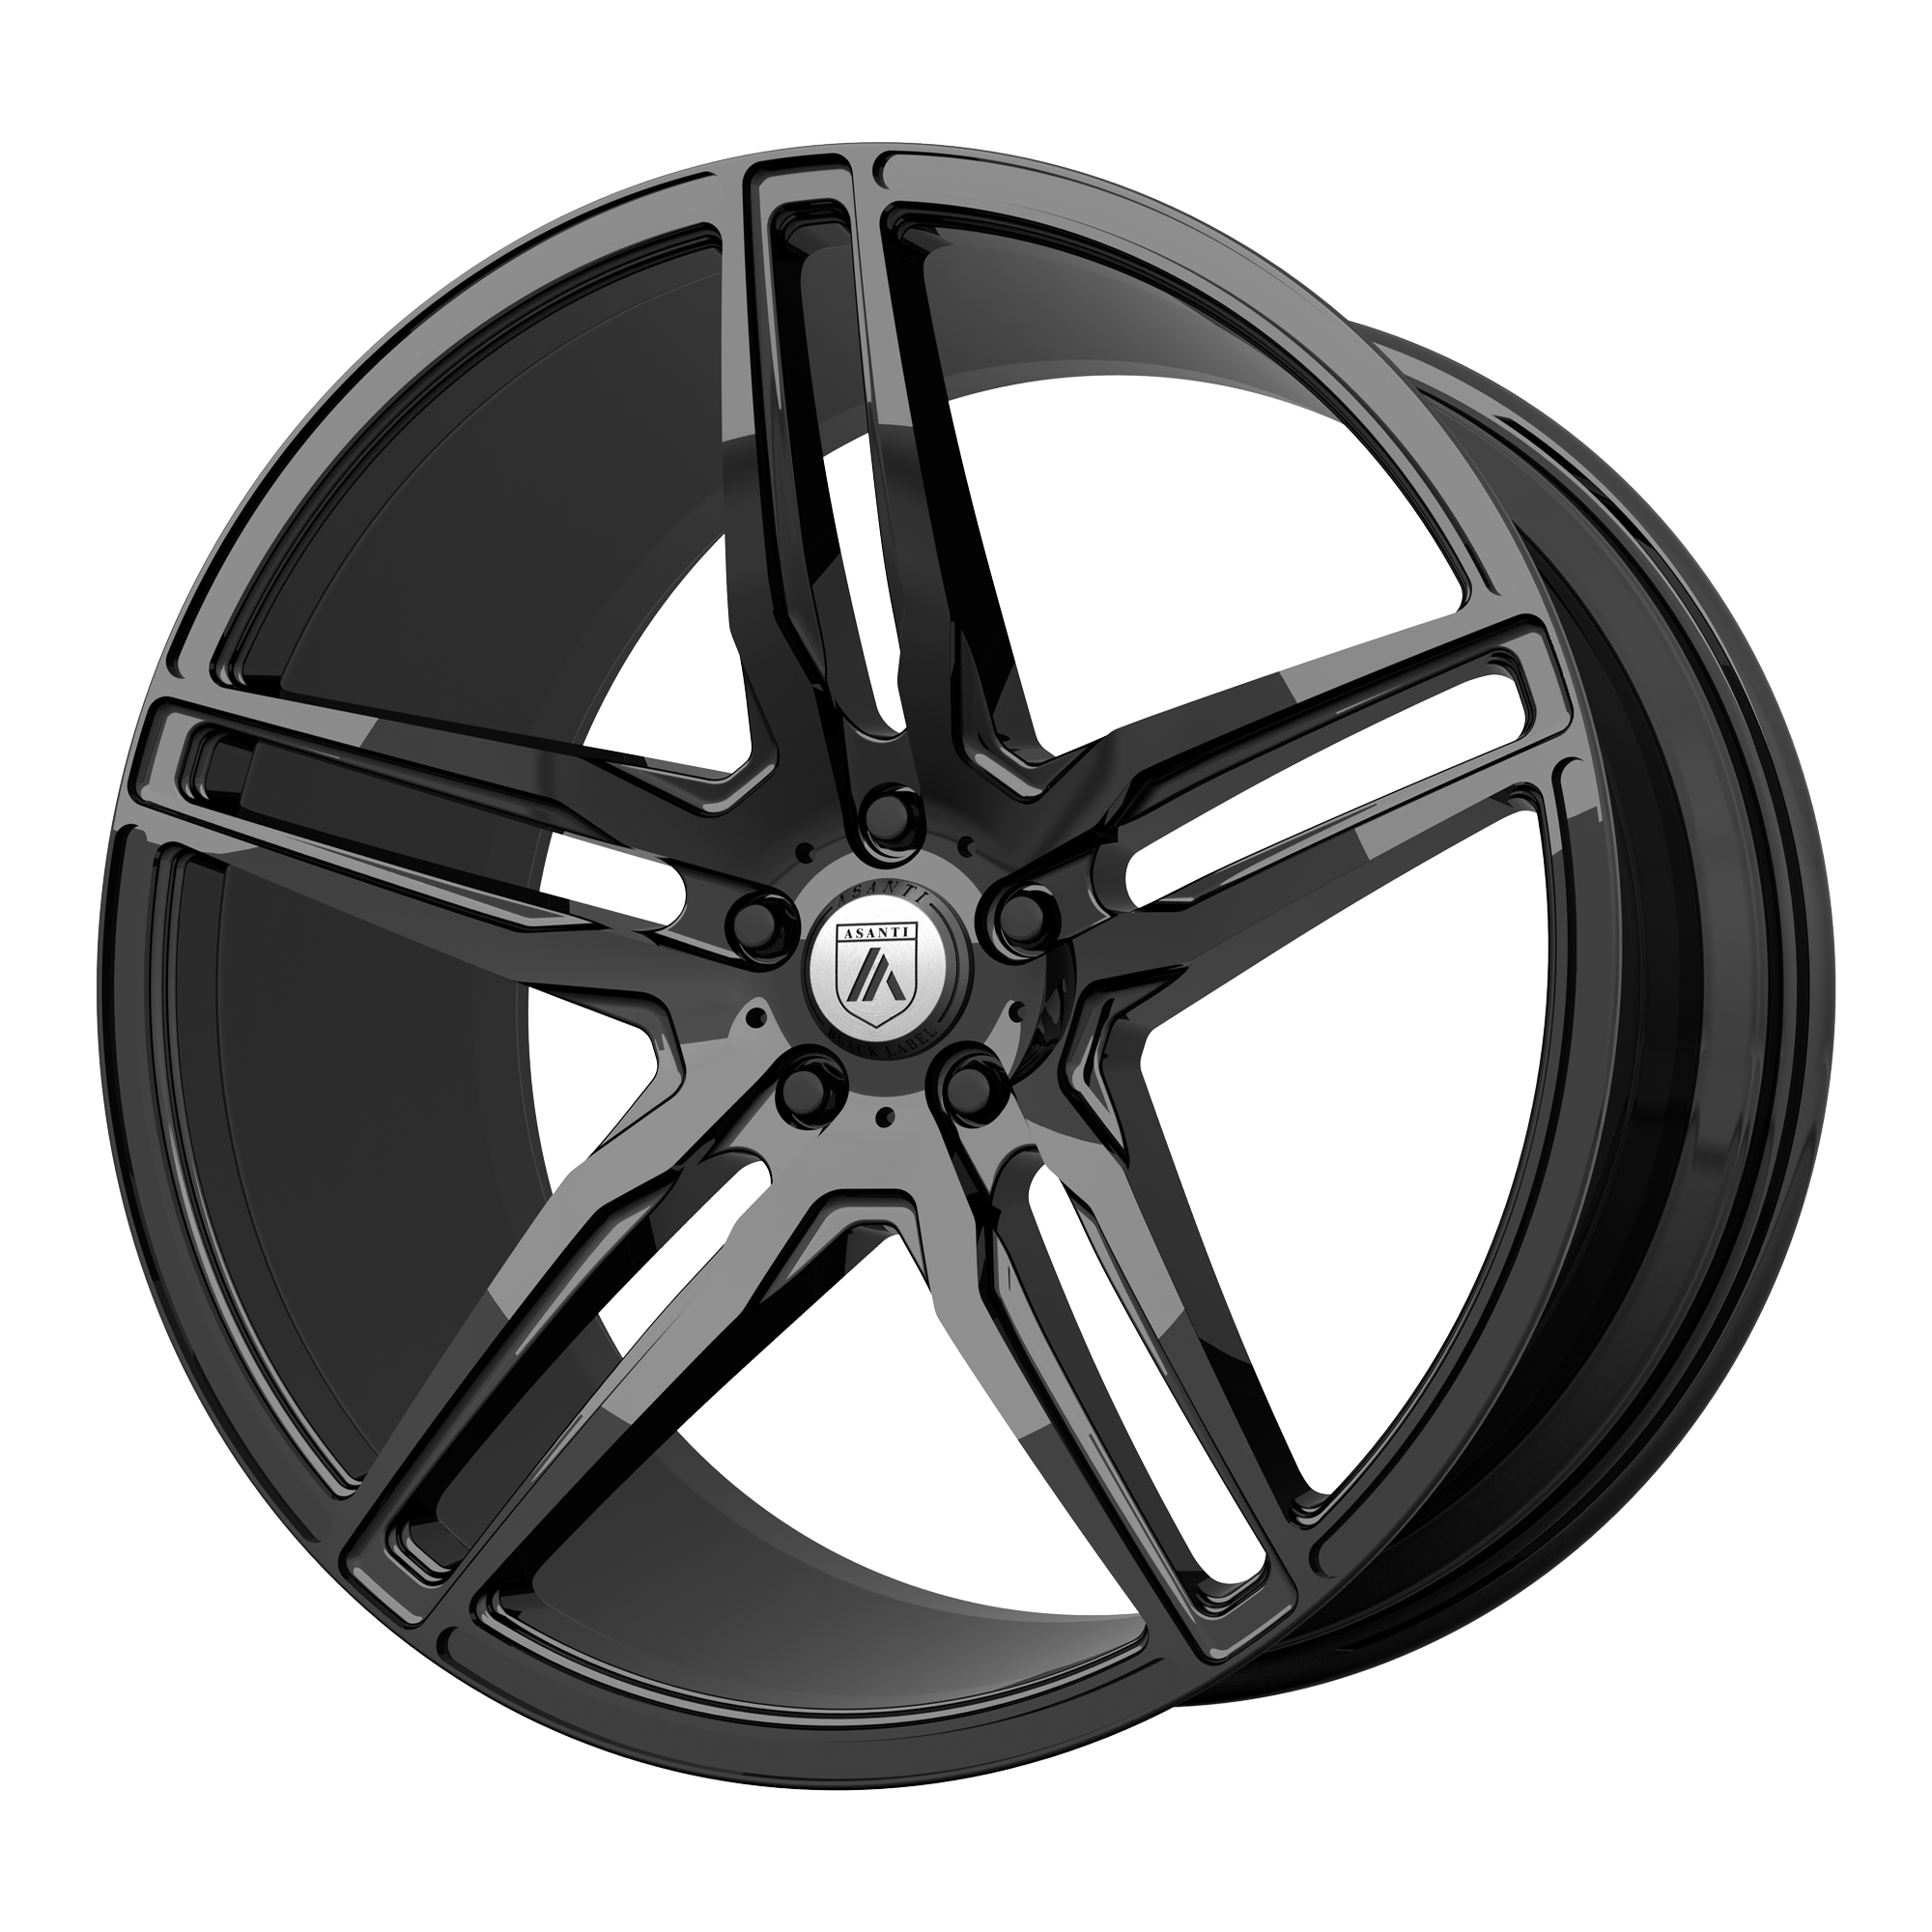 ORION 20x9 5x112.00 GLOSS BLACK (35 mm) - Tires and Engine Performance